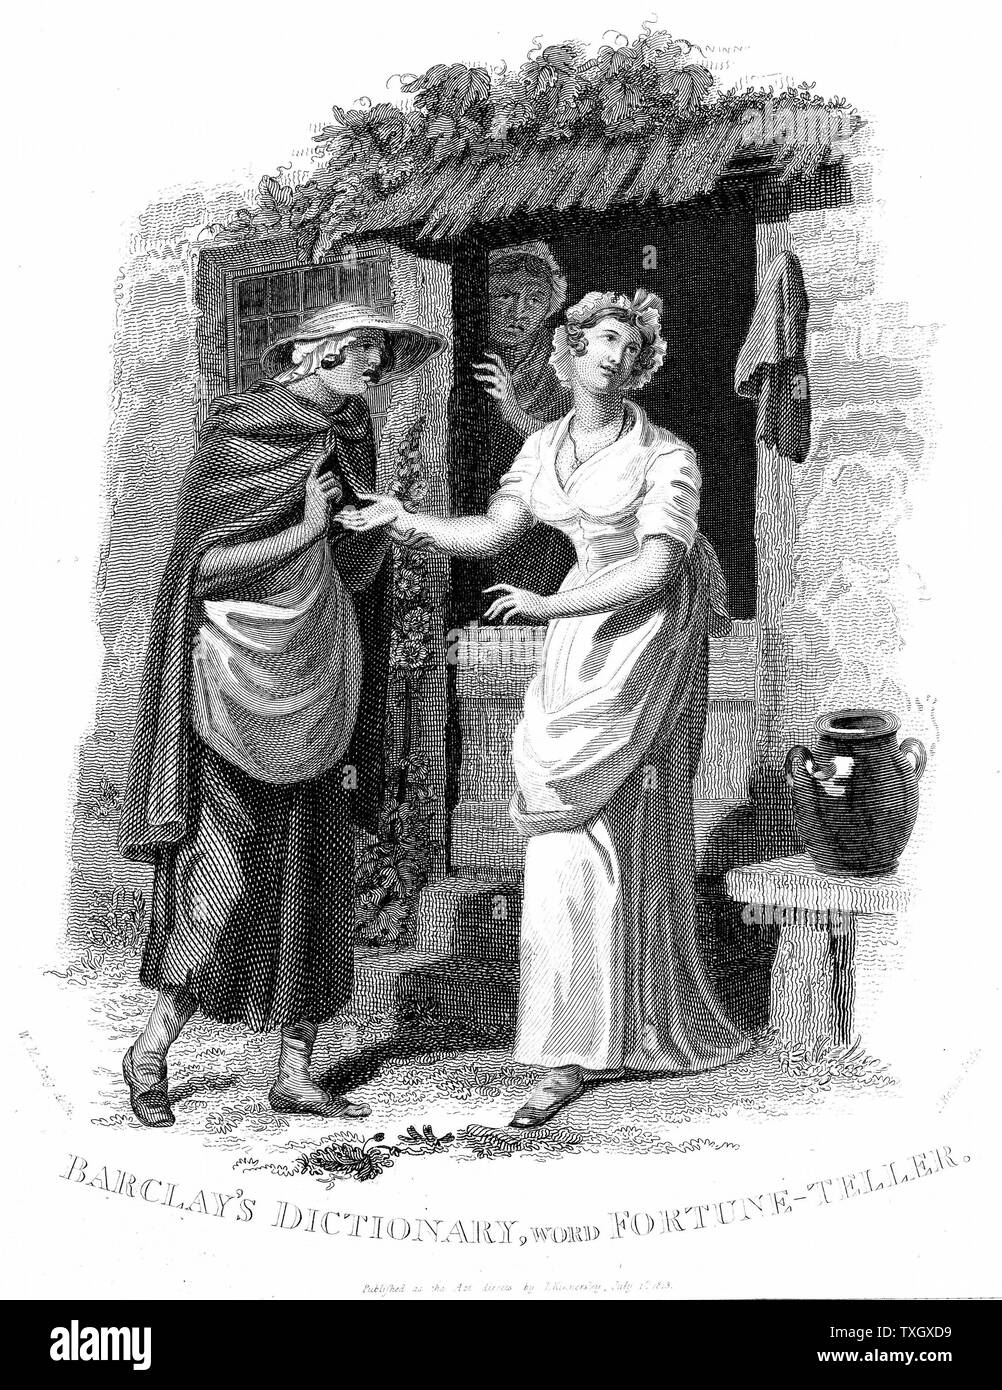 Chiromancy, Country girl having her hand read by an itinerant fortune teller who sees misfortunes ahead. Illustration by William Marshall Craig (c1765-c1834) Engraving Stock Photo